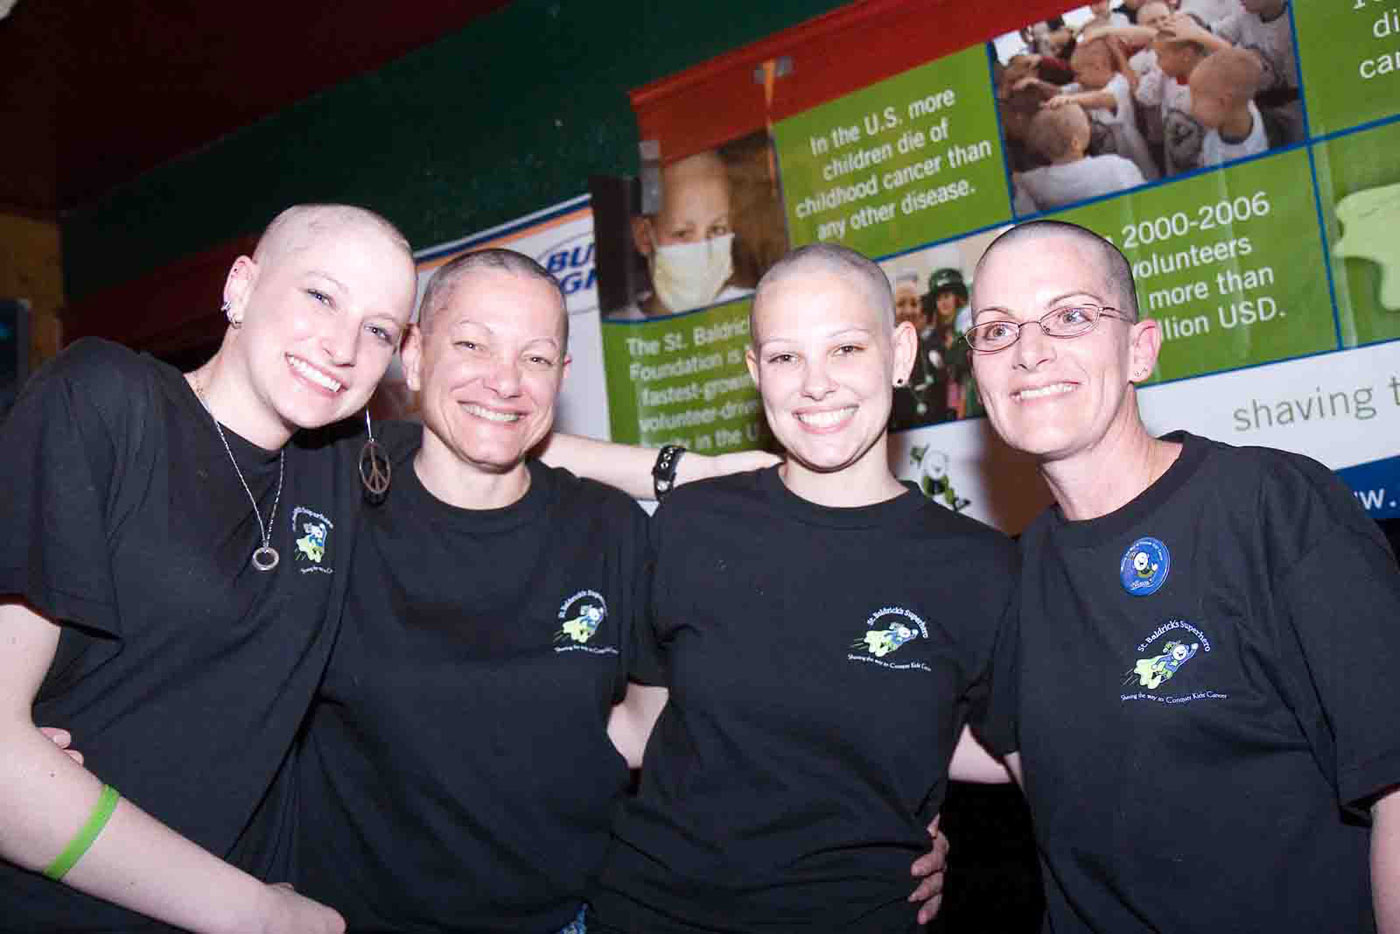 Group photo of St. Baldrick's Day participants Katherine Henshaw, Donna Henshaw, Erin Henshaw and Ruth Poole-Henshaw 